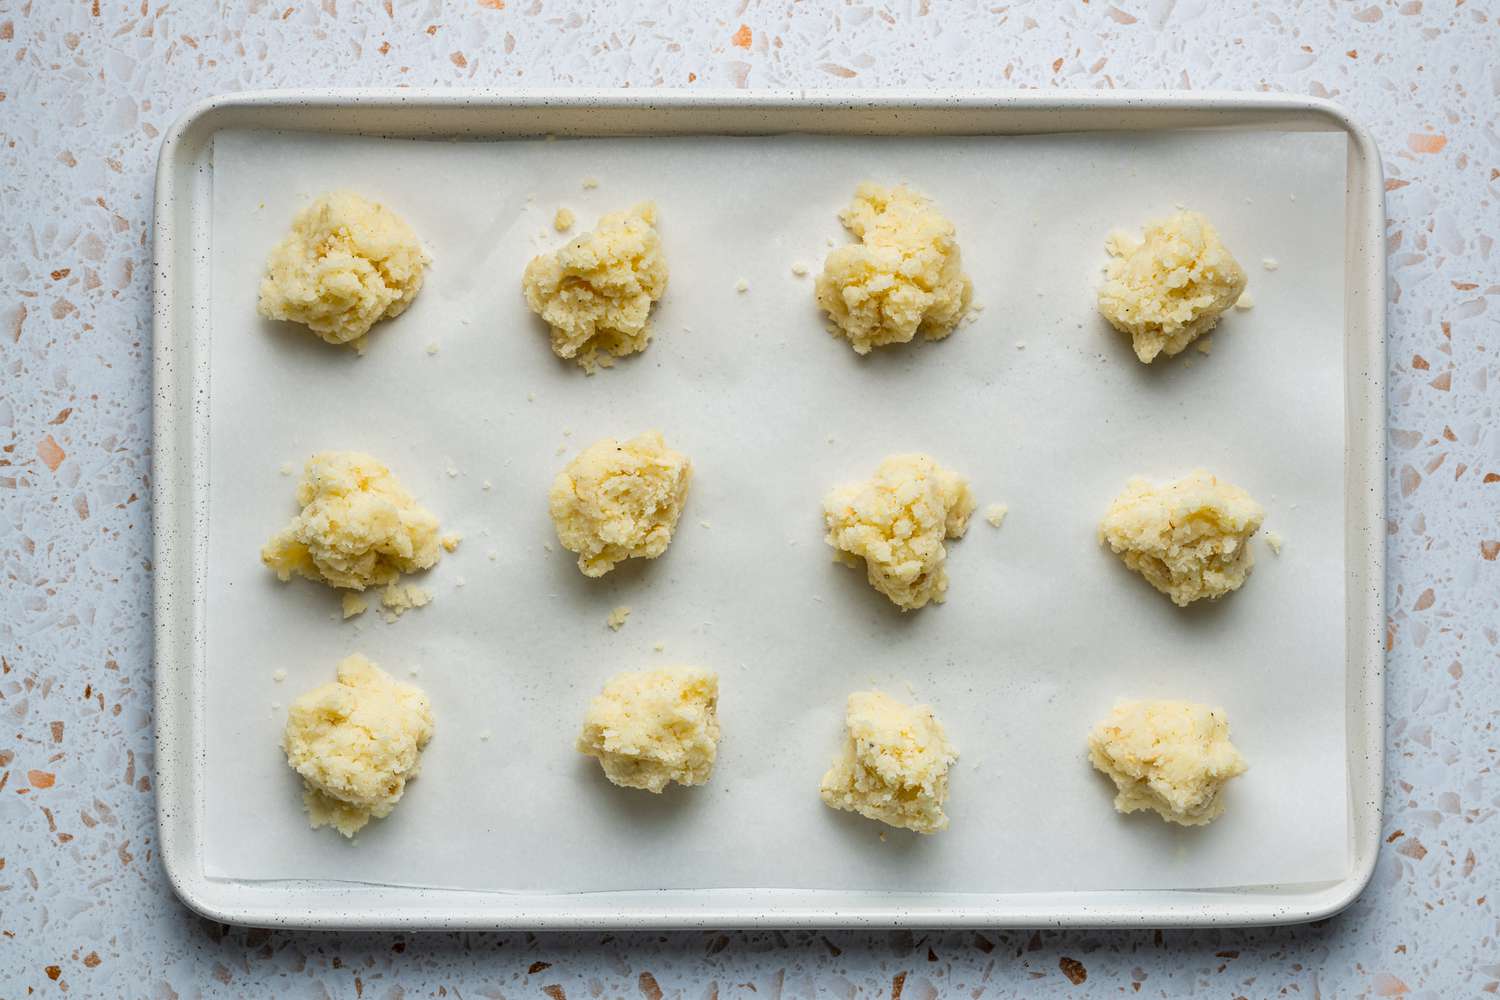 A parchment paper-lined baking sheet with 12 equal portions of the coconut laddoo mixture